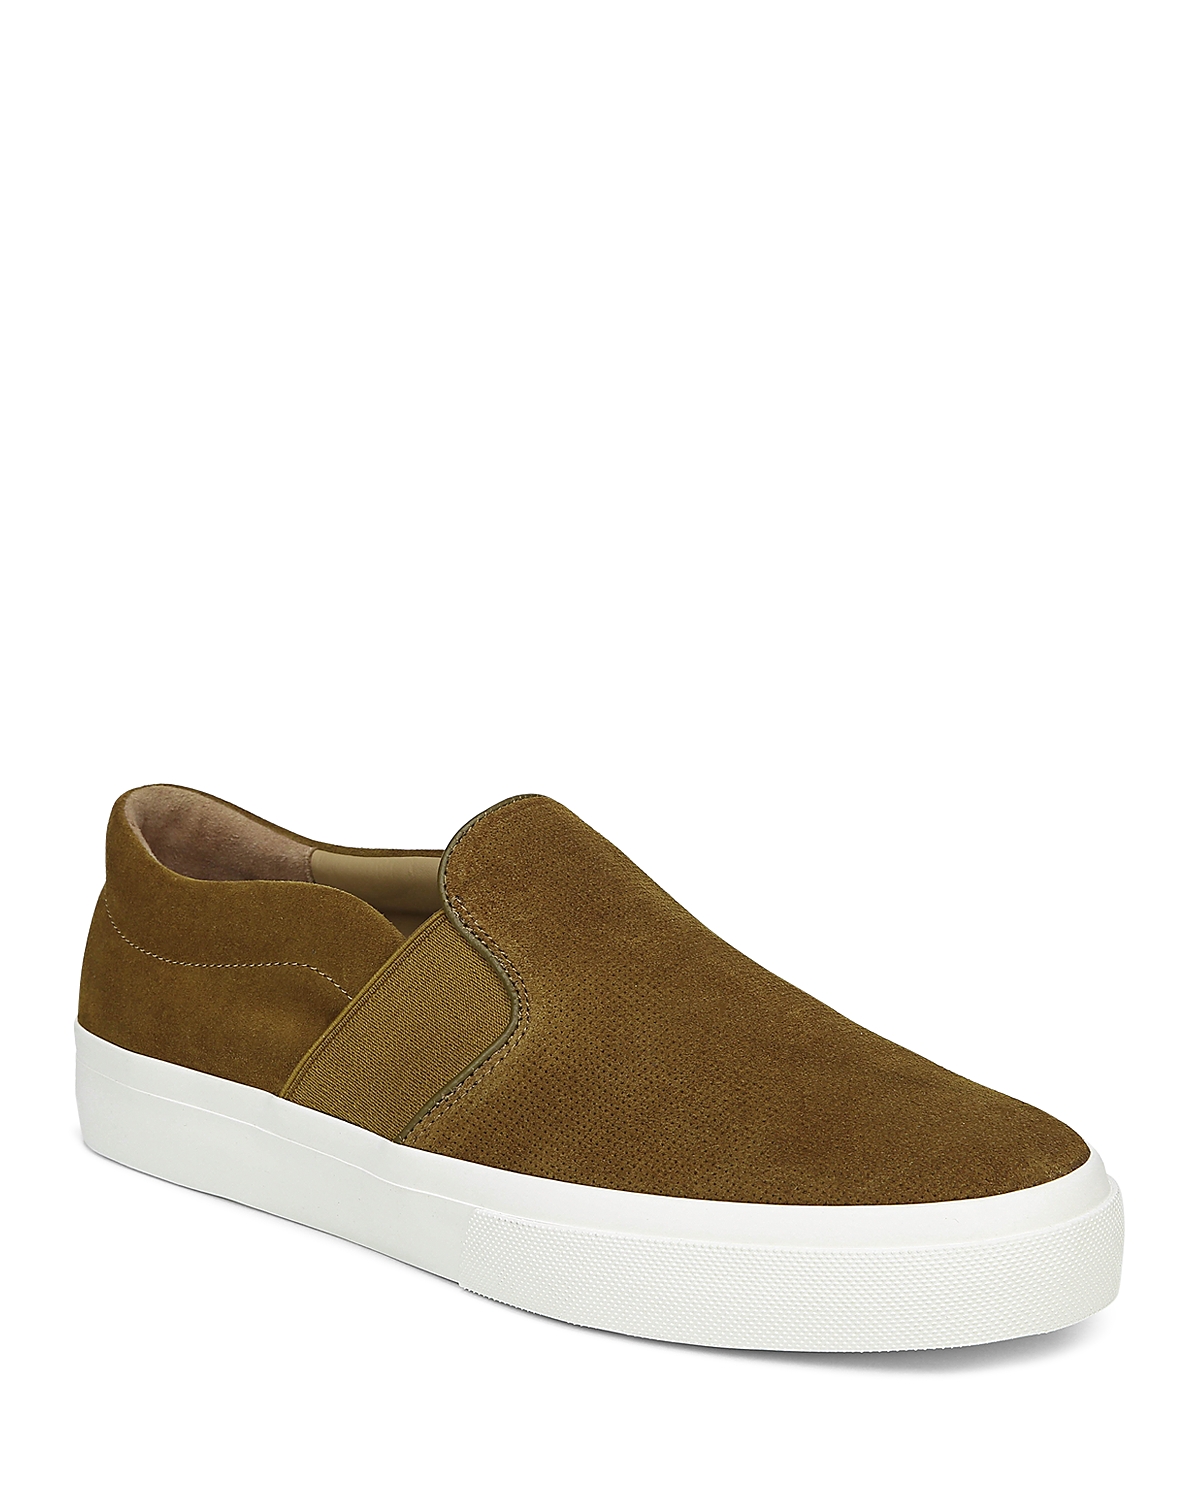 woocommerce-673321-2209615.cloudwaysapps.com-vince-mens-brown-suede-fenton-slip-on-perforated-sneakers